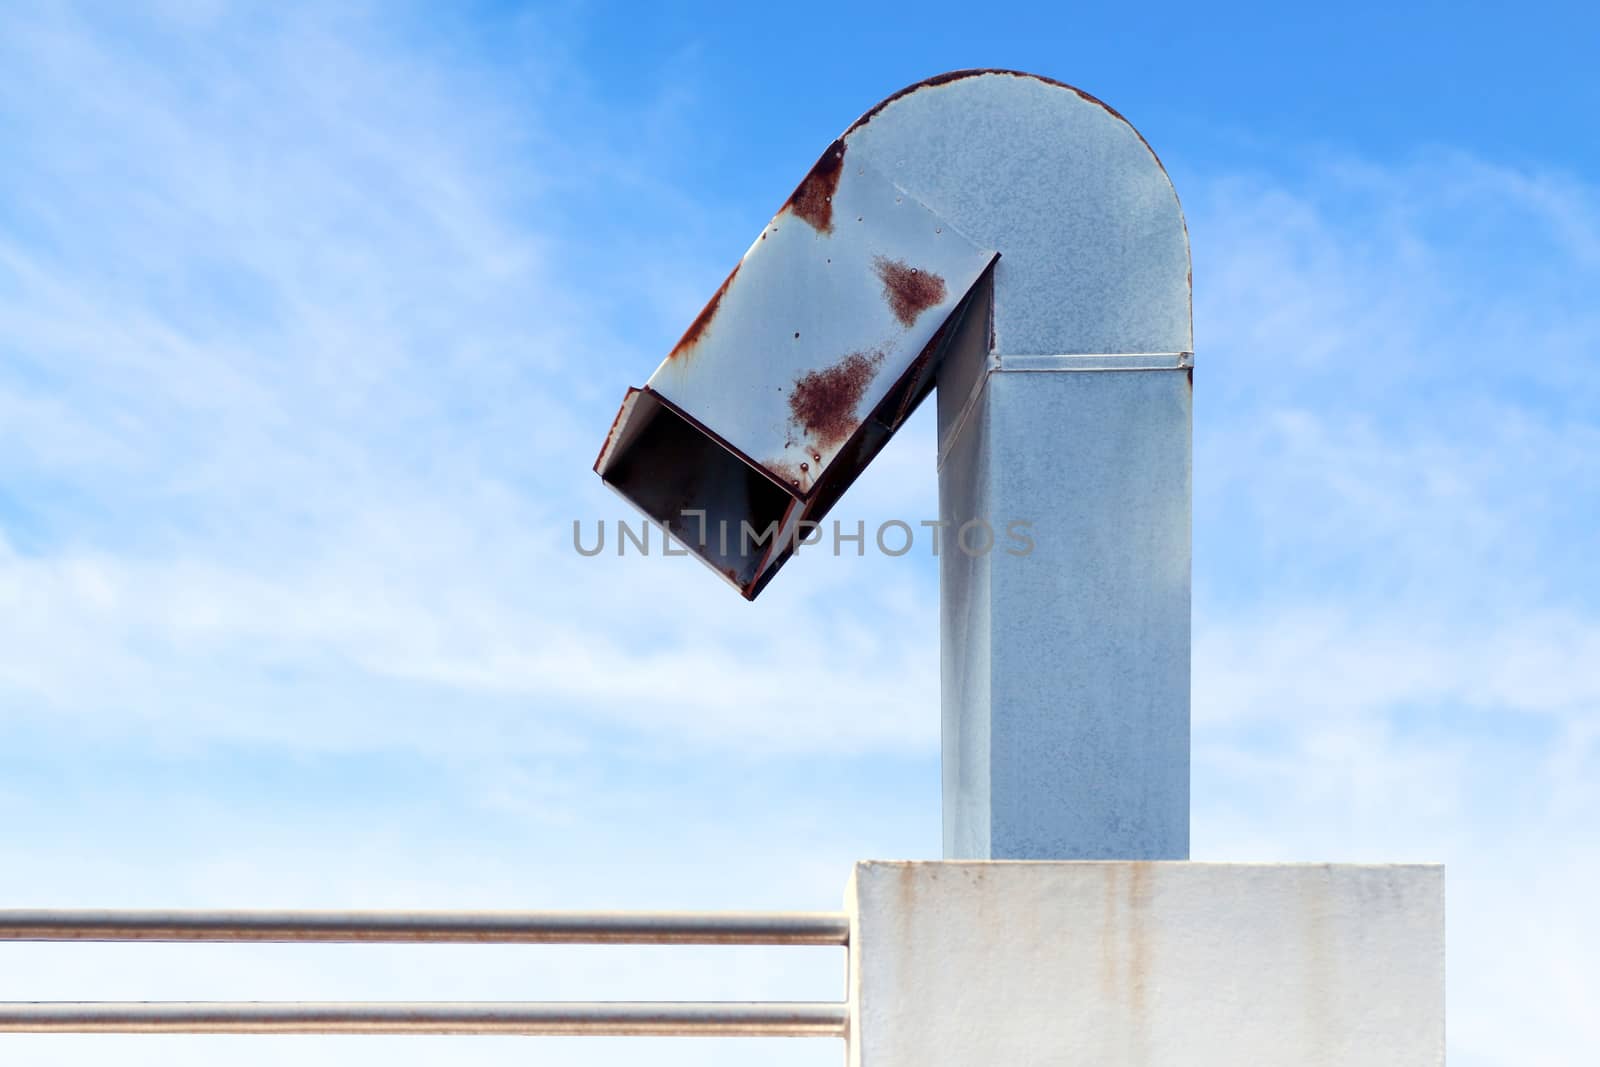 smokestack, flue, chimney of industrial factory on sky blue by cgdeaw